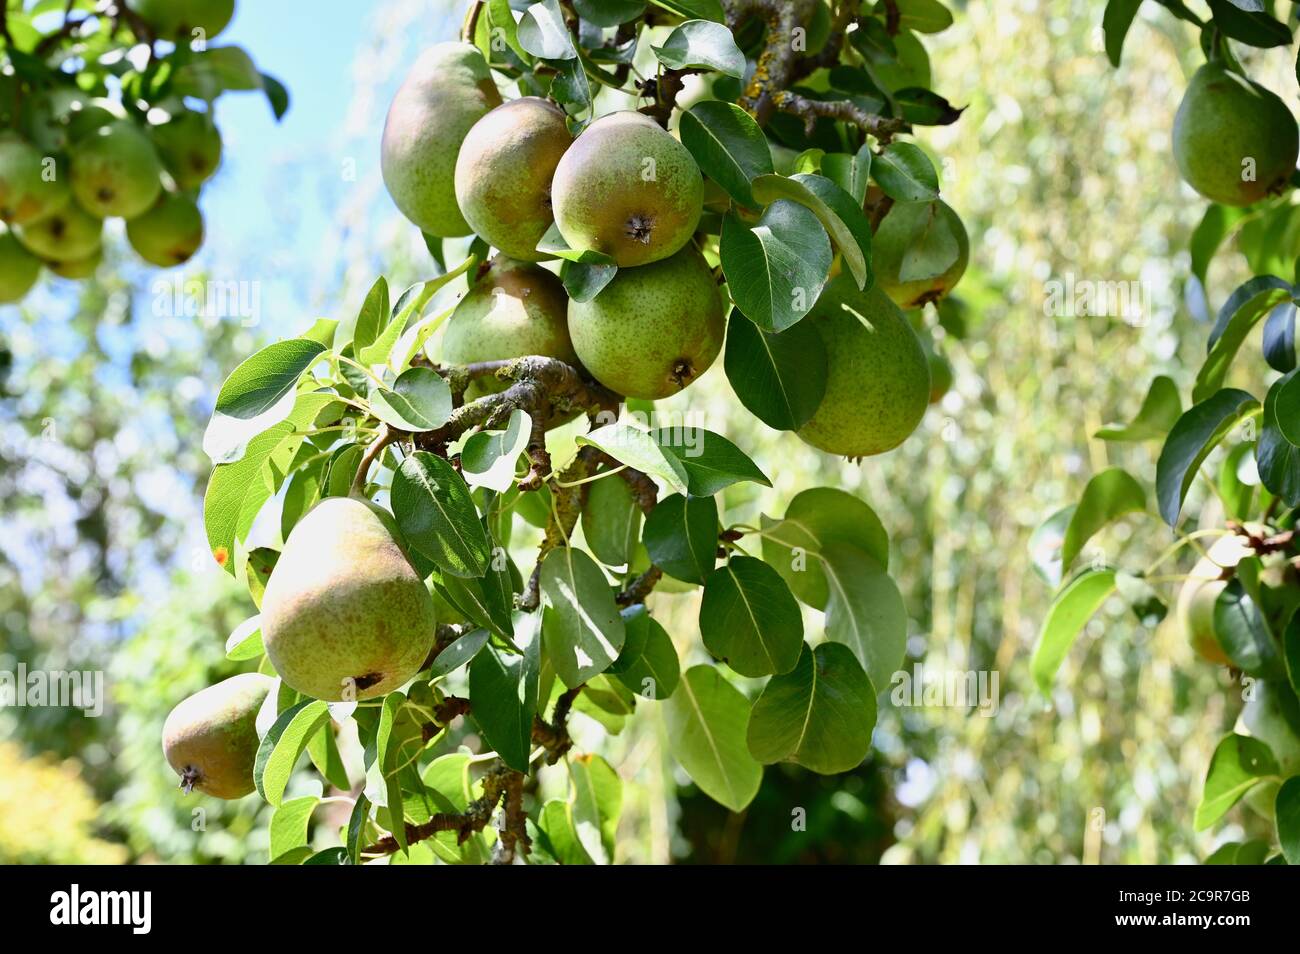 Pear tree laden with fruit. Sidcup, Kent. UK Stock Photo